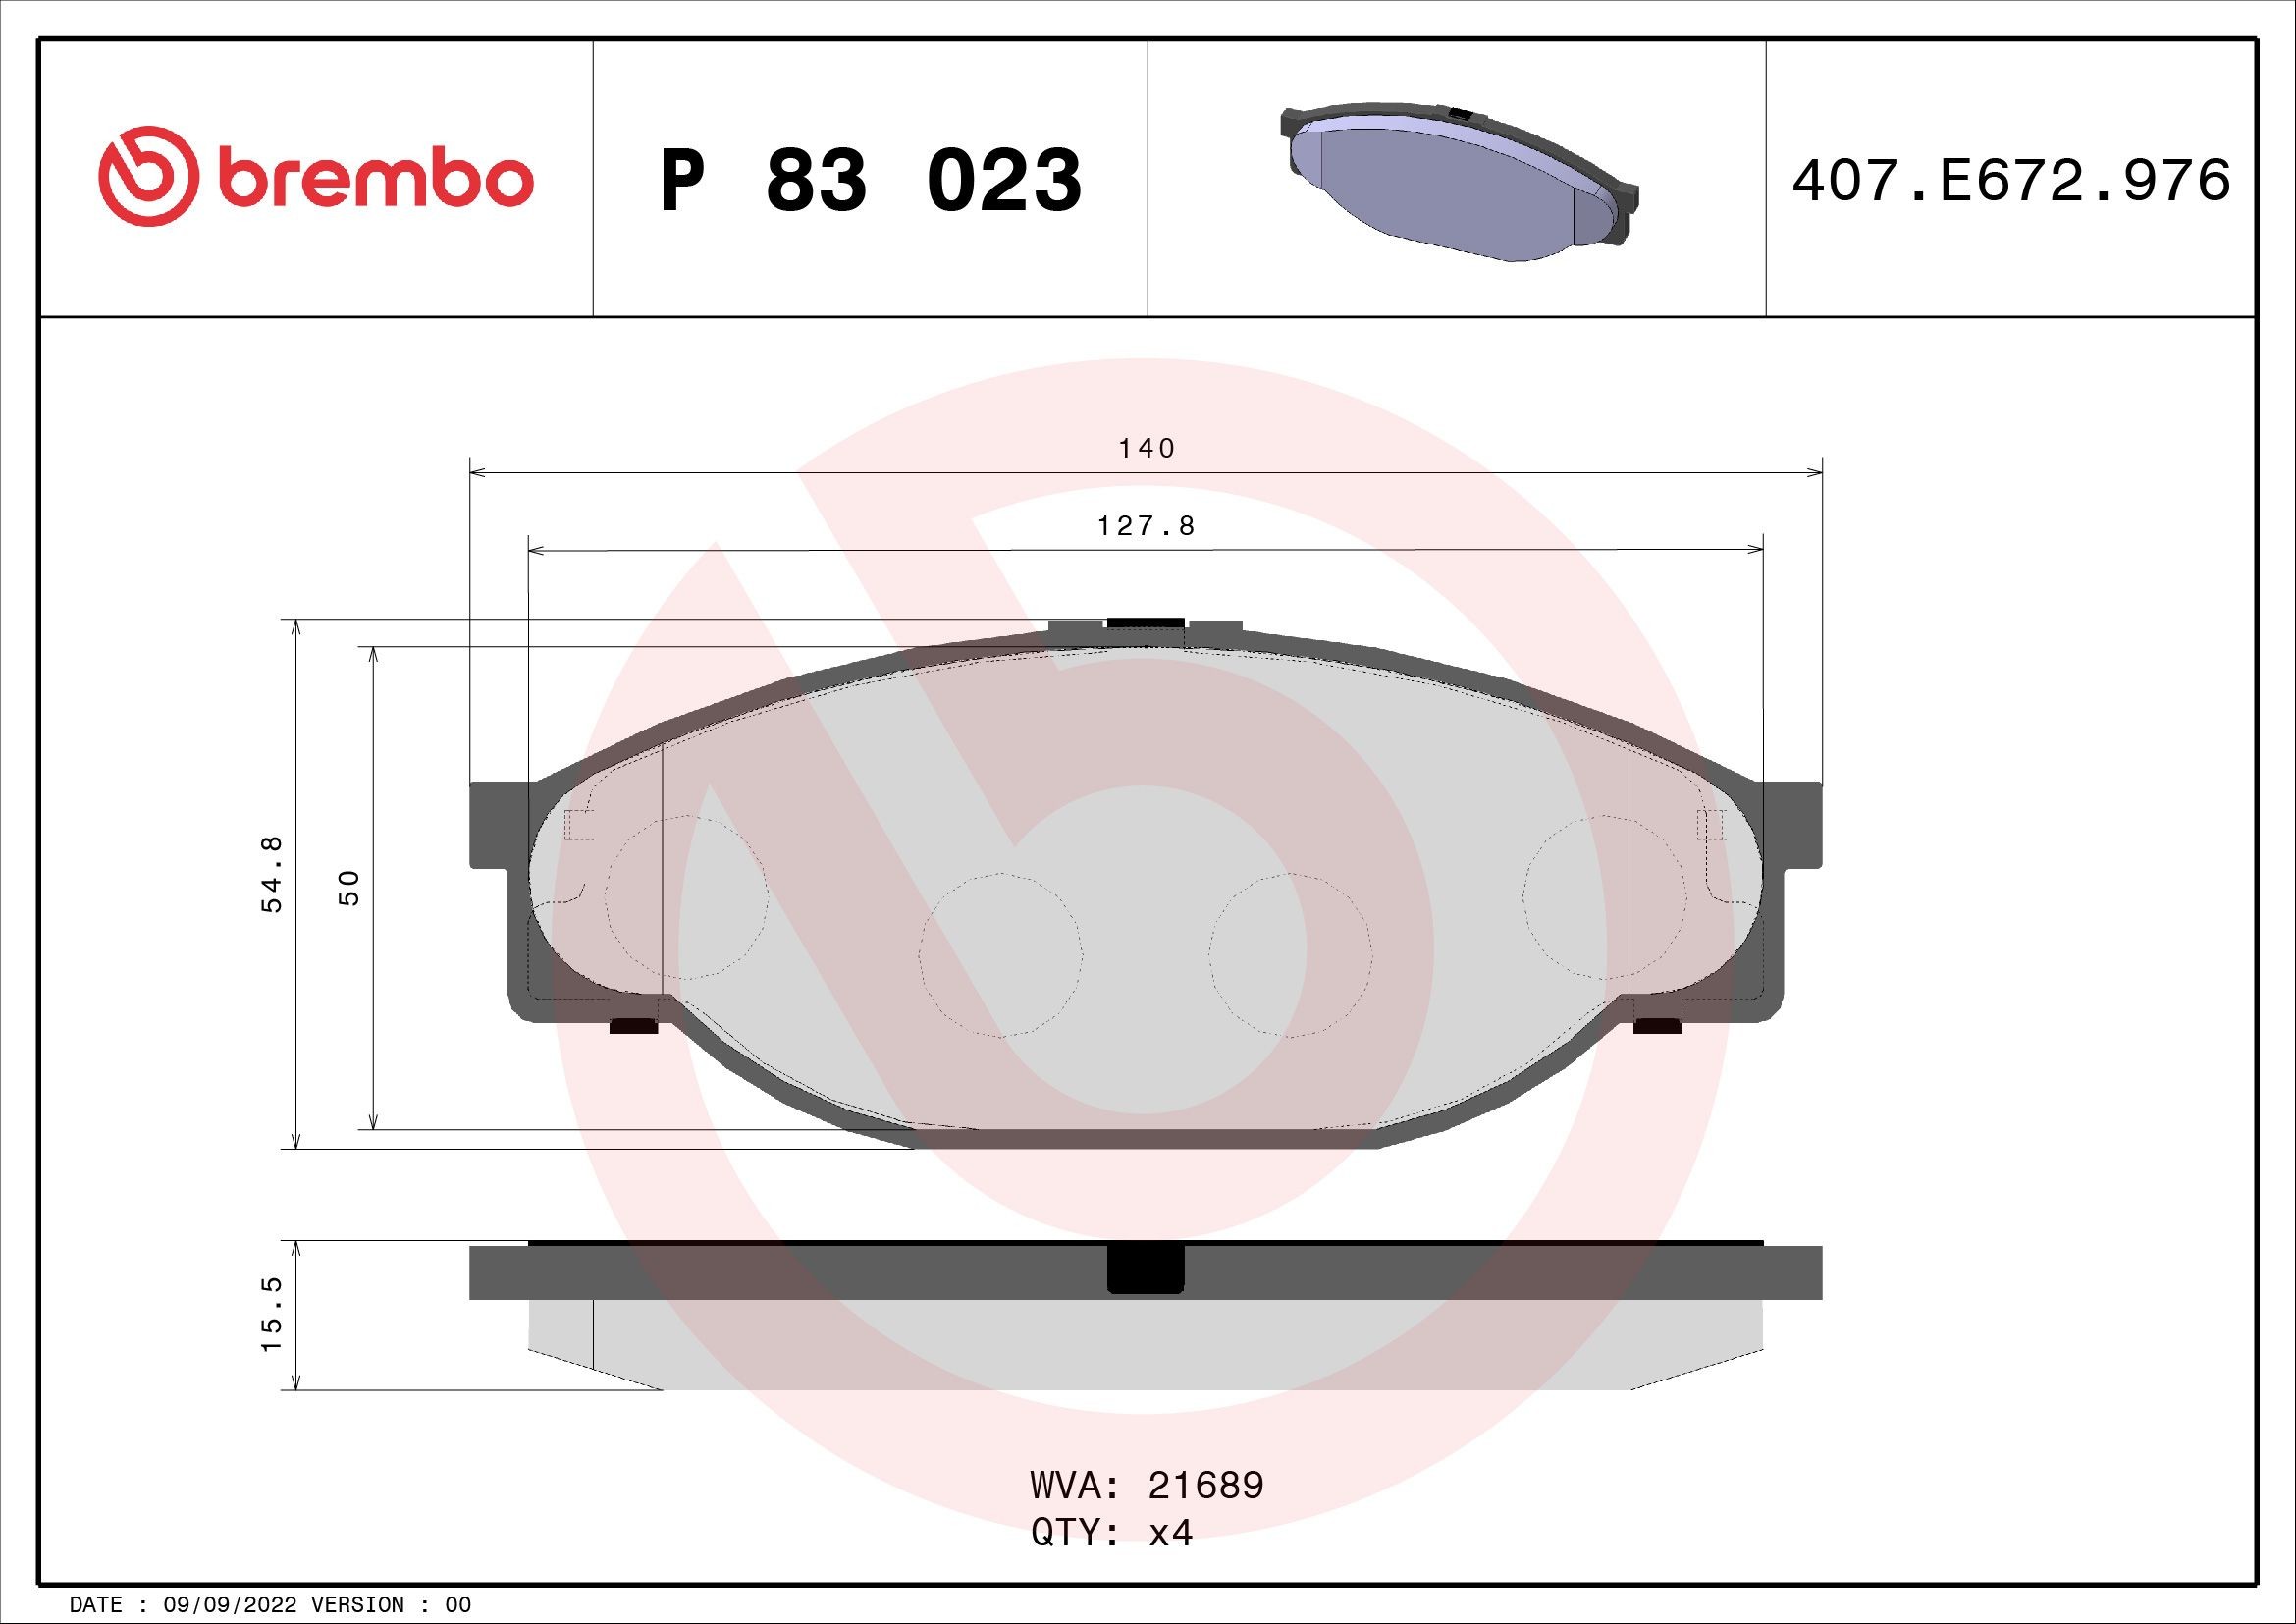 BREMBO P 83 023 Brake pad set excl. wear warning contact, without accessories